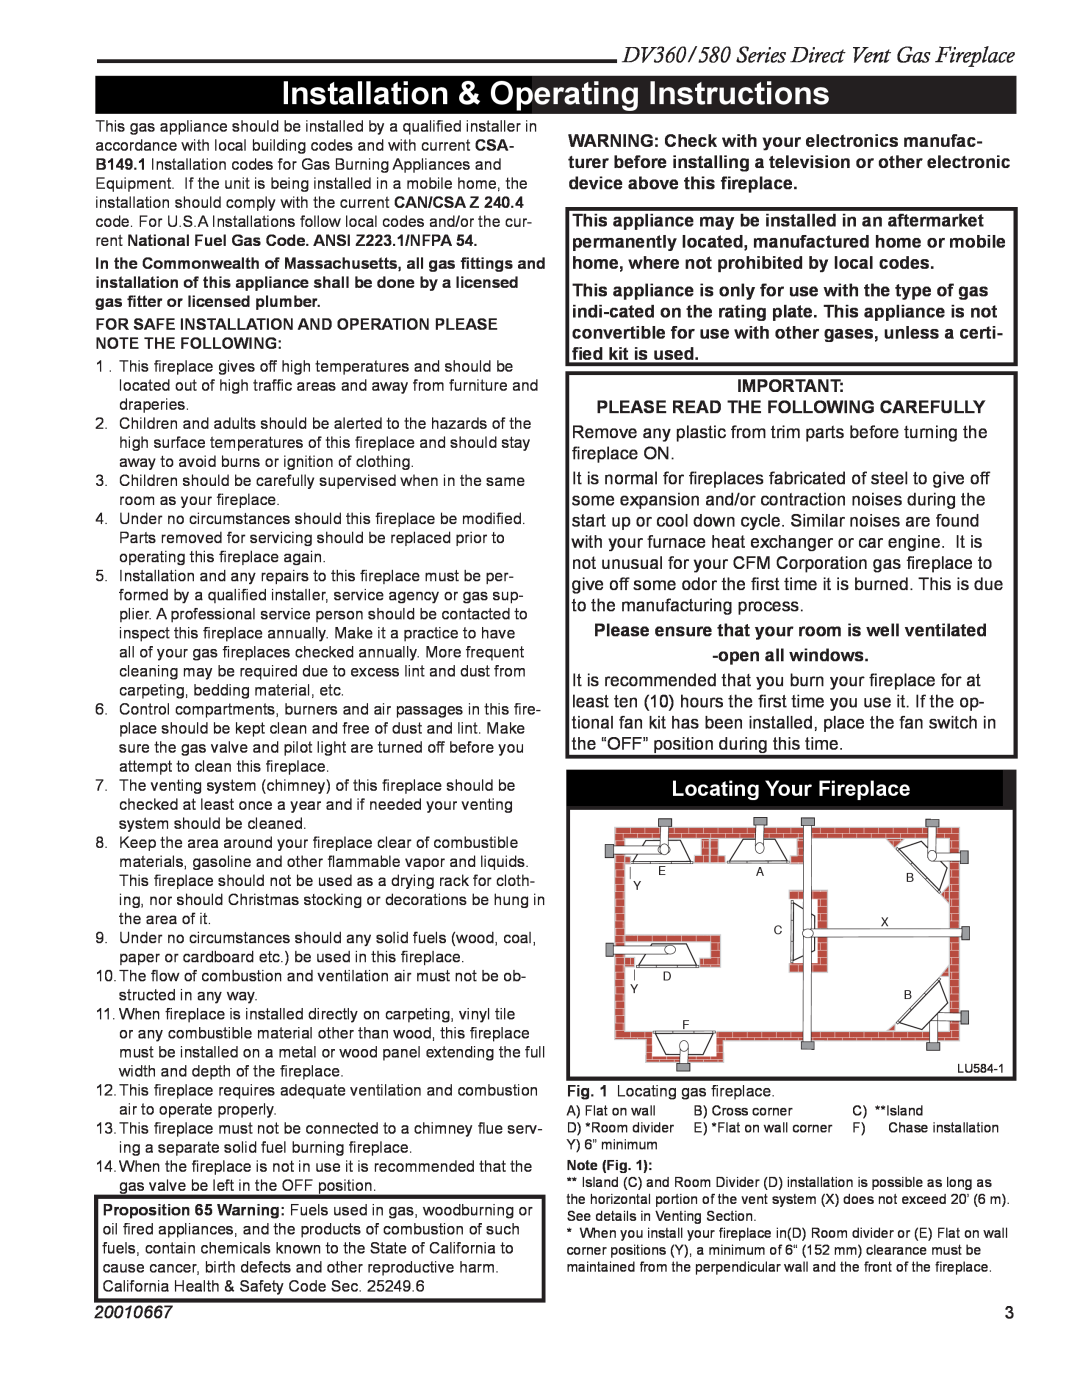 Vermont Casting DV580 manual Installation & Operating Instructions, DV360/580 Series Direct Vent Gas Fireplace, 20010667 